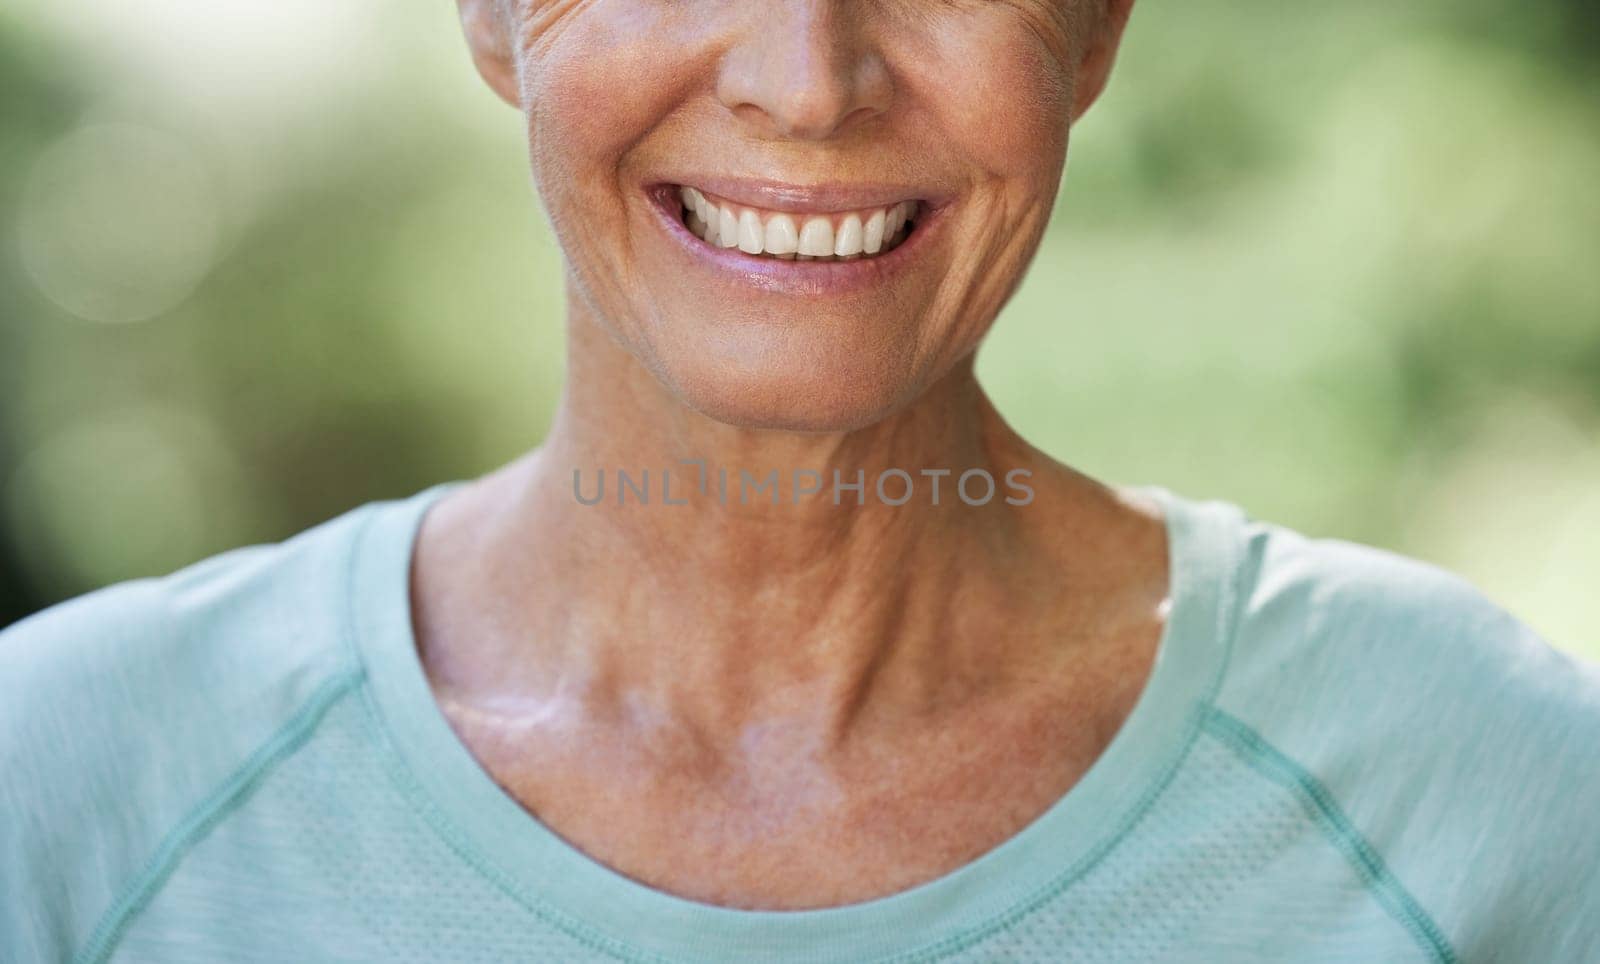 Smile, teeth and closeup with a senior woman outdoor in nature feeling happy, positive or carefree. Mouth, cheerful and dental with a mature female smiling happily outside in a garden during summer by YuriArcurs